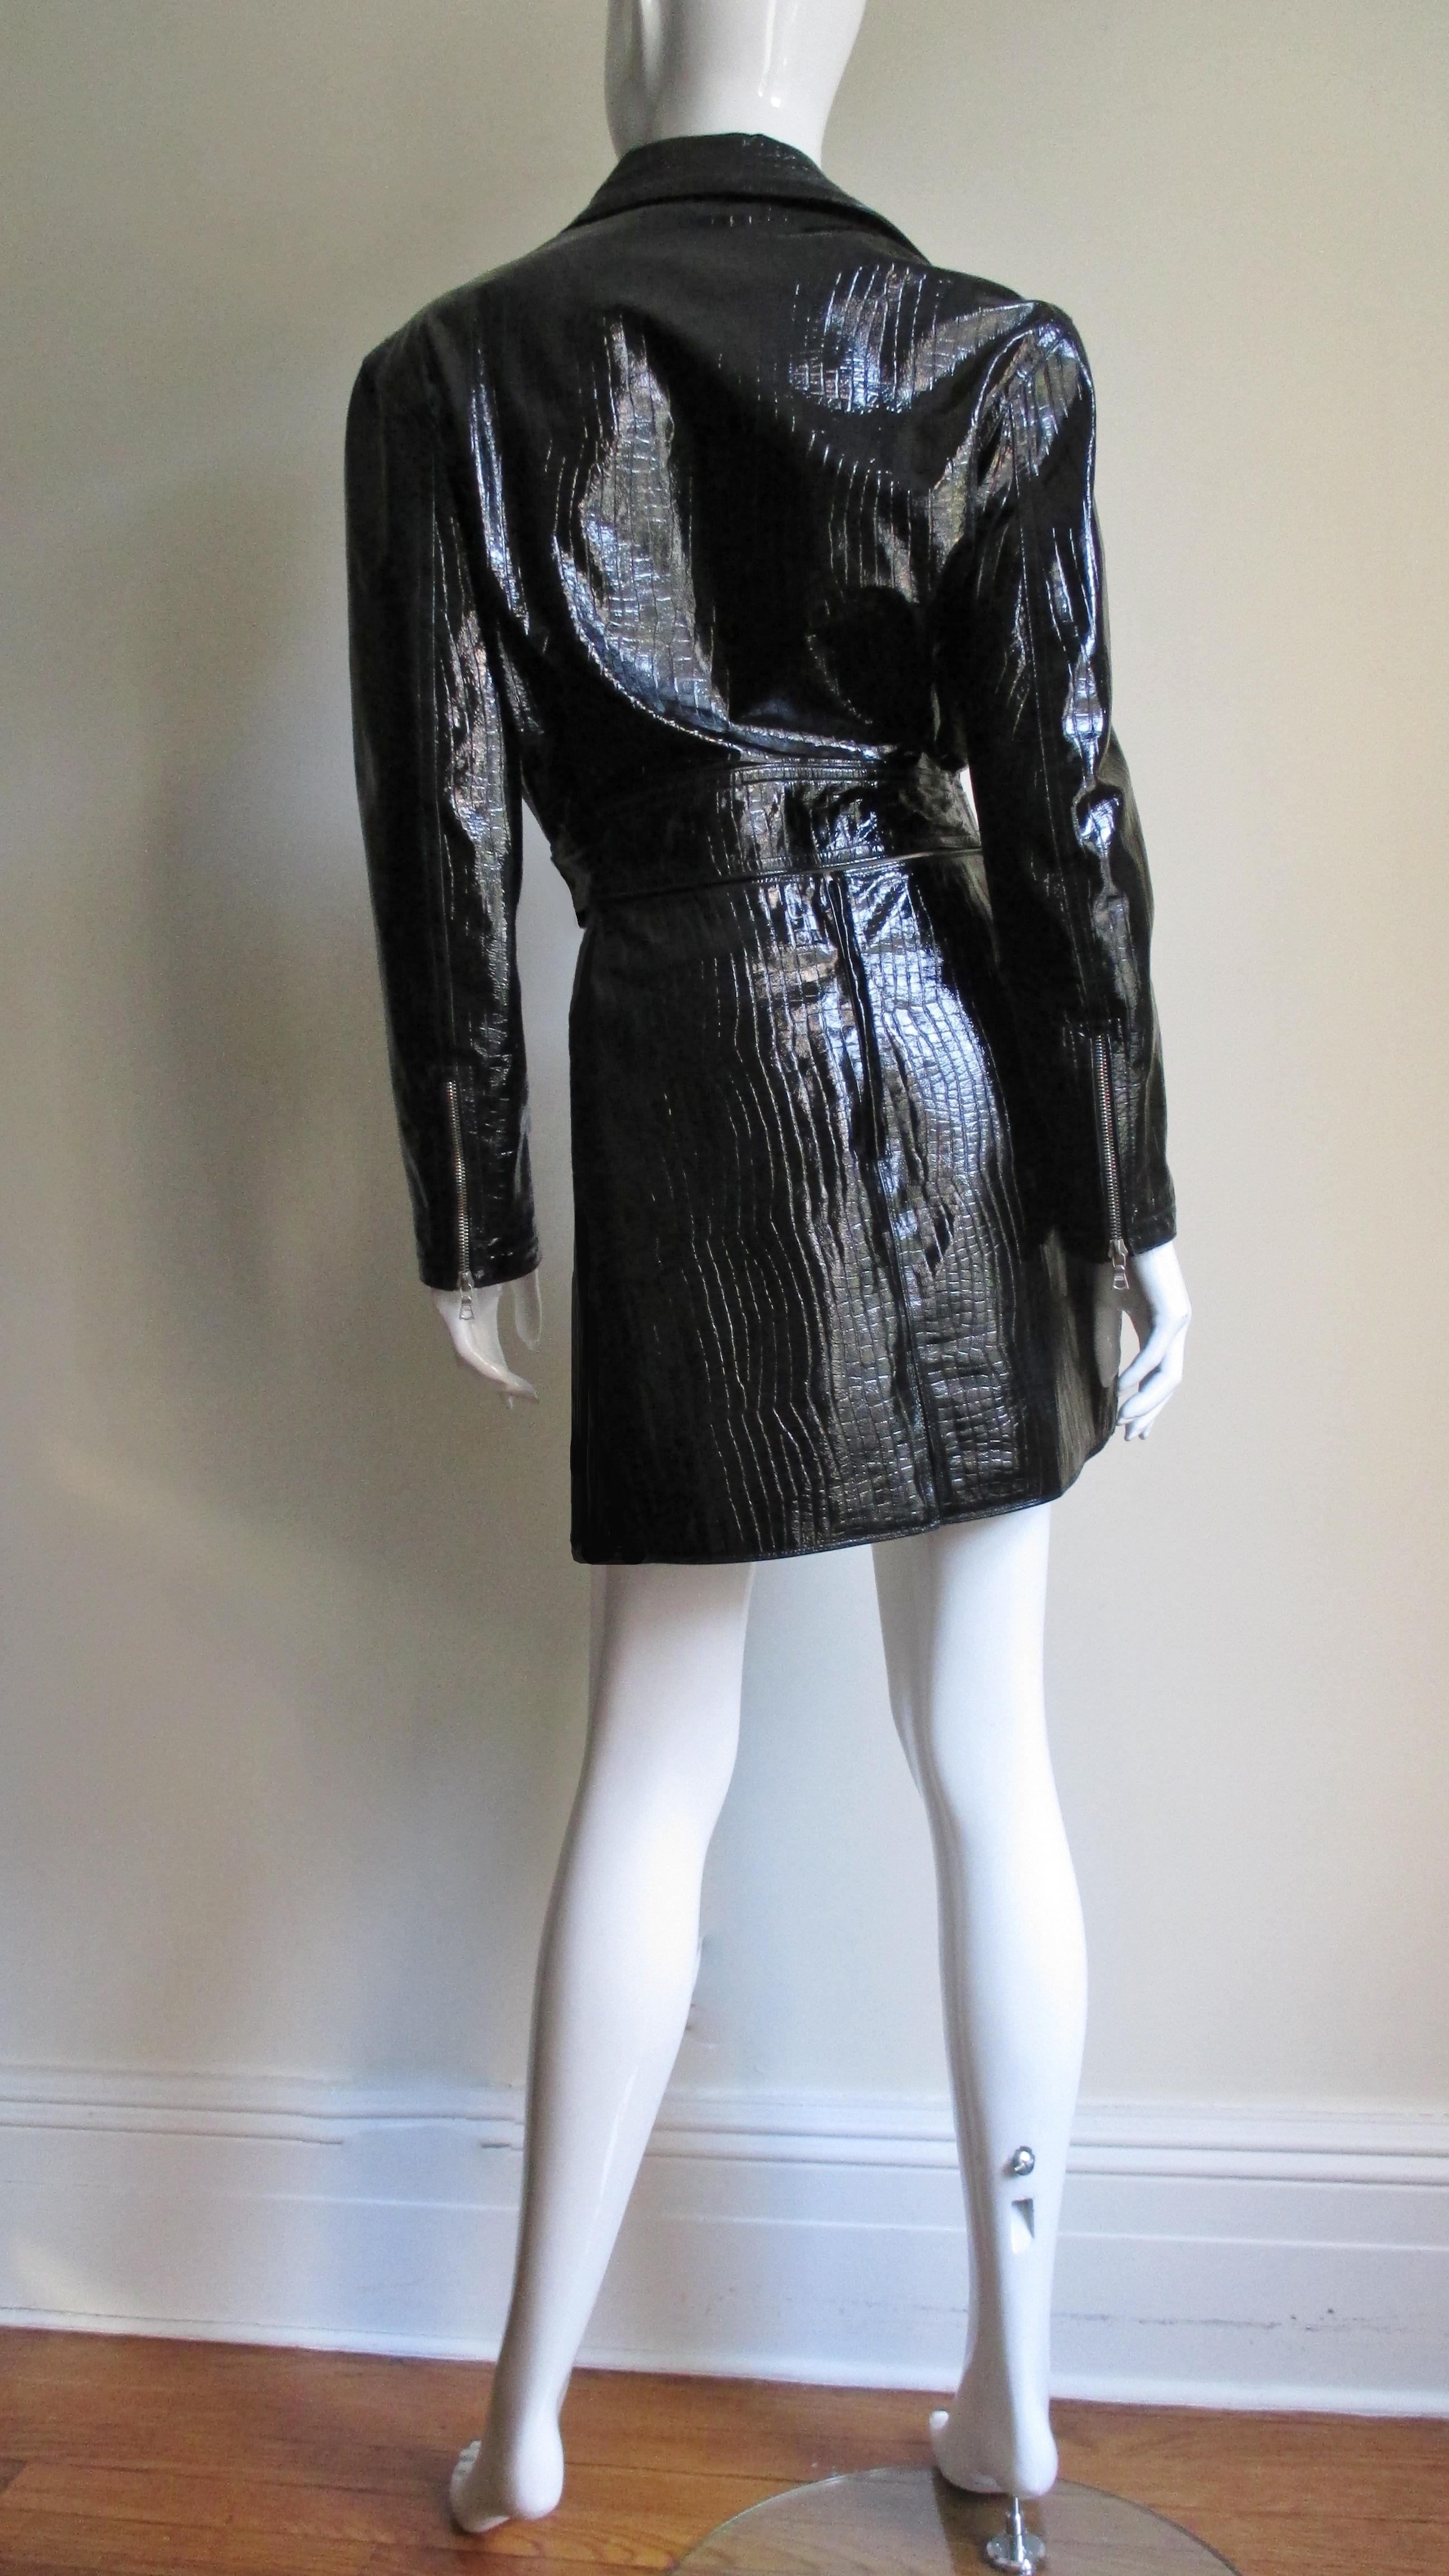 Gianni Versace Leather Motorcycle Jacket and Skirt A/W 1994 For Sale 5